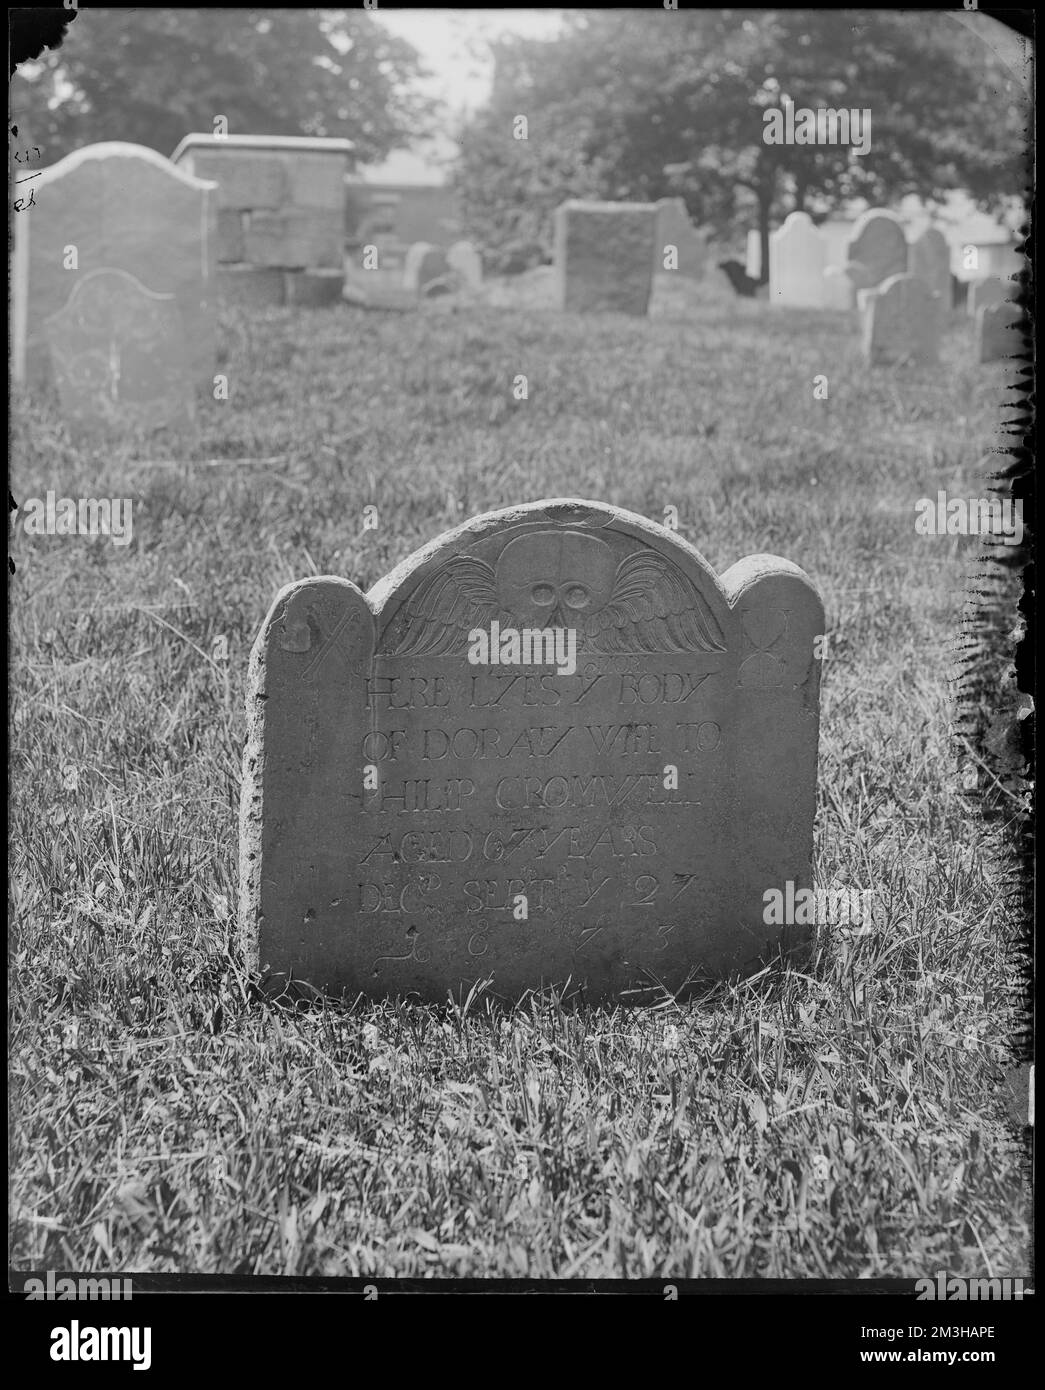 Monuments, Doraty, wife of Philip Cromwell, September 27, 1673, Salem, Charter Street Cemetery , Cemeteries, Graves. Frank Cousins Glass Plate Negatives Collection Stock Photo